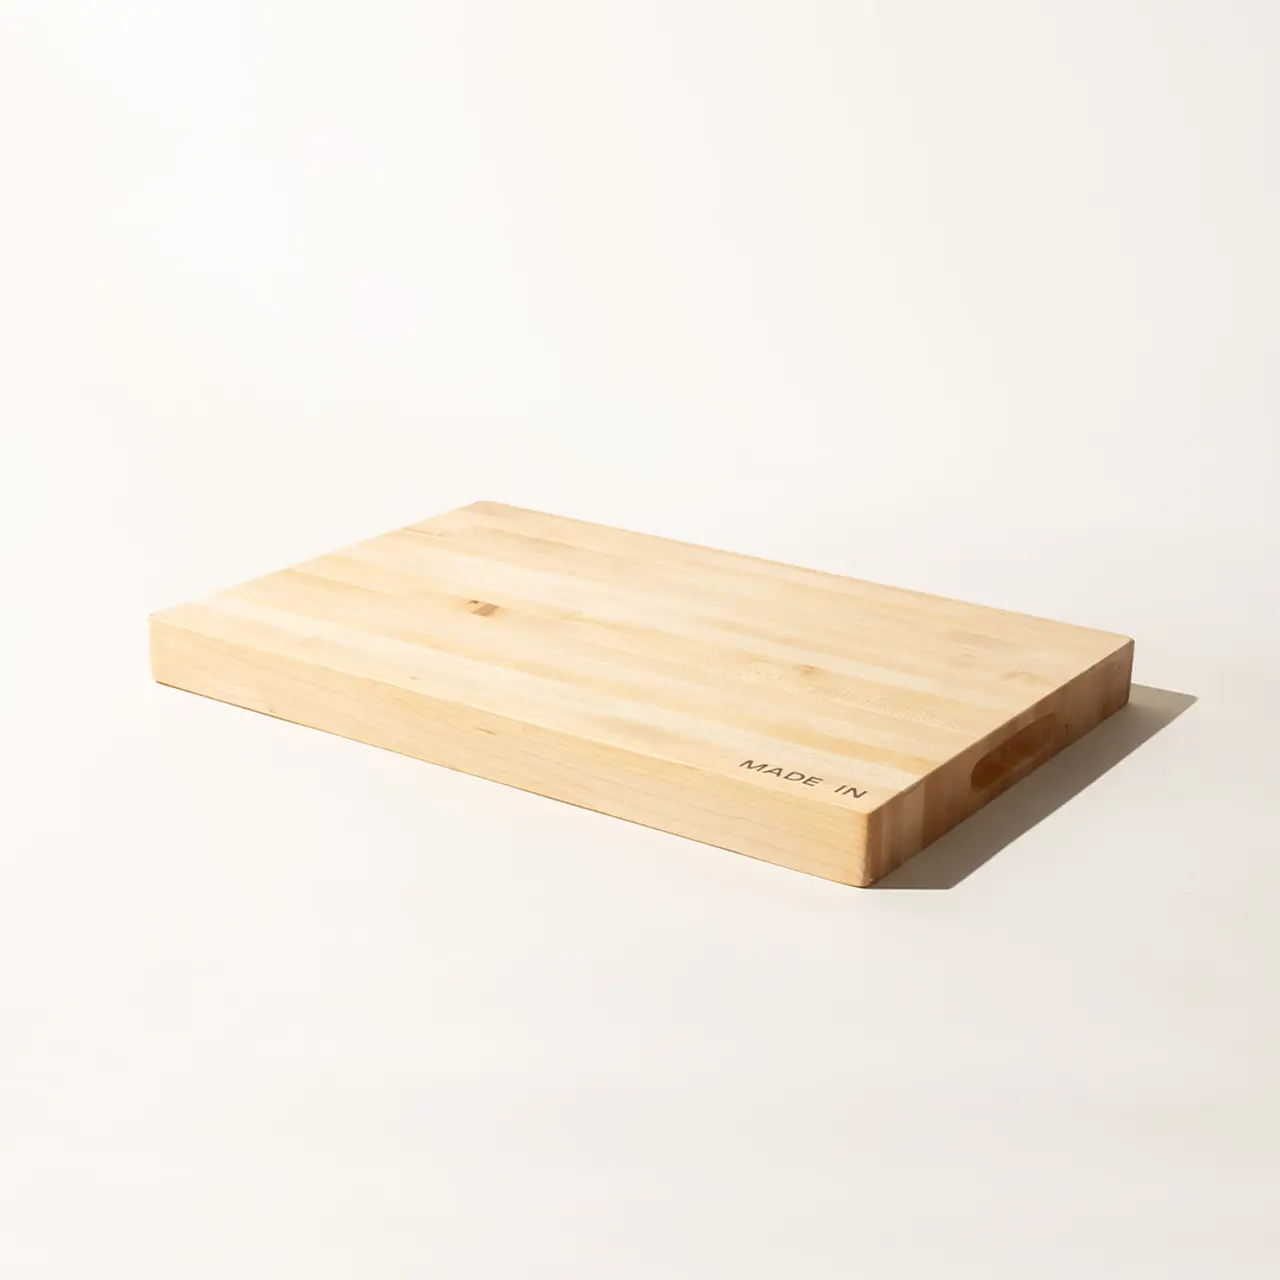 A plain wooden cutting board is displayed against a light background.